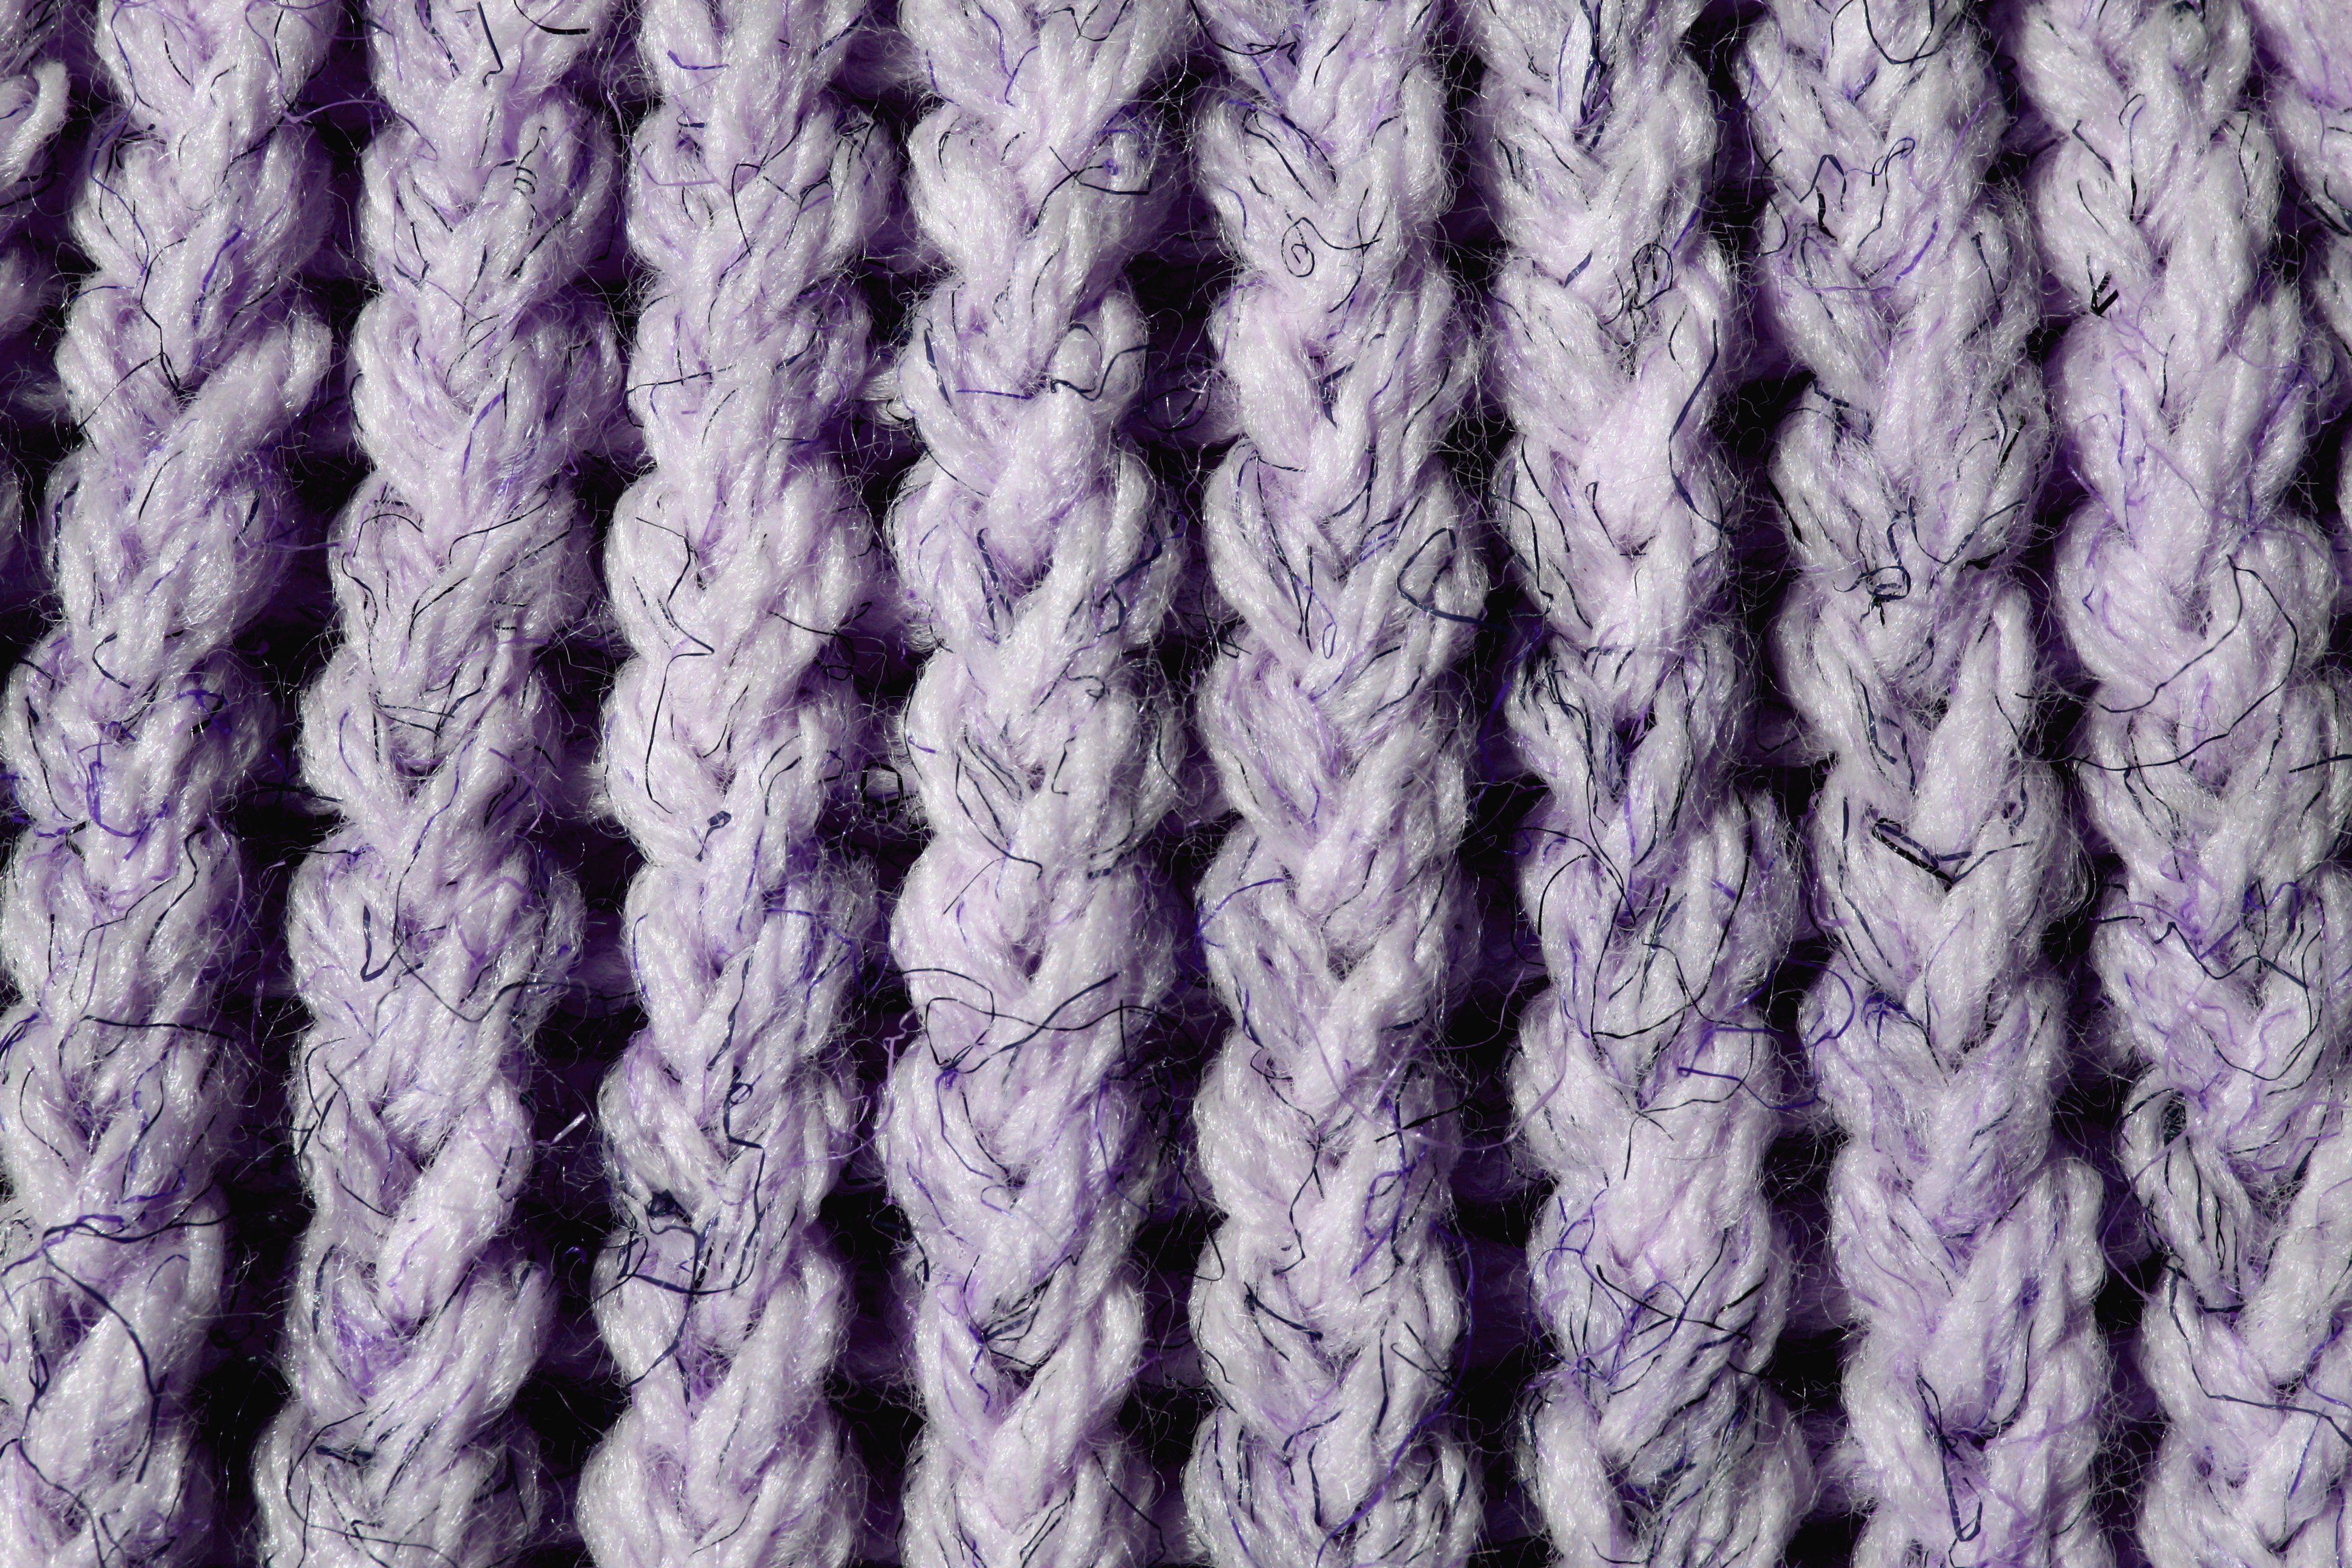 Lavender Knit Yarn Close Up Texture Picture. Free Photograph